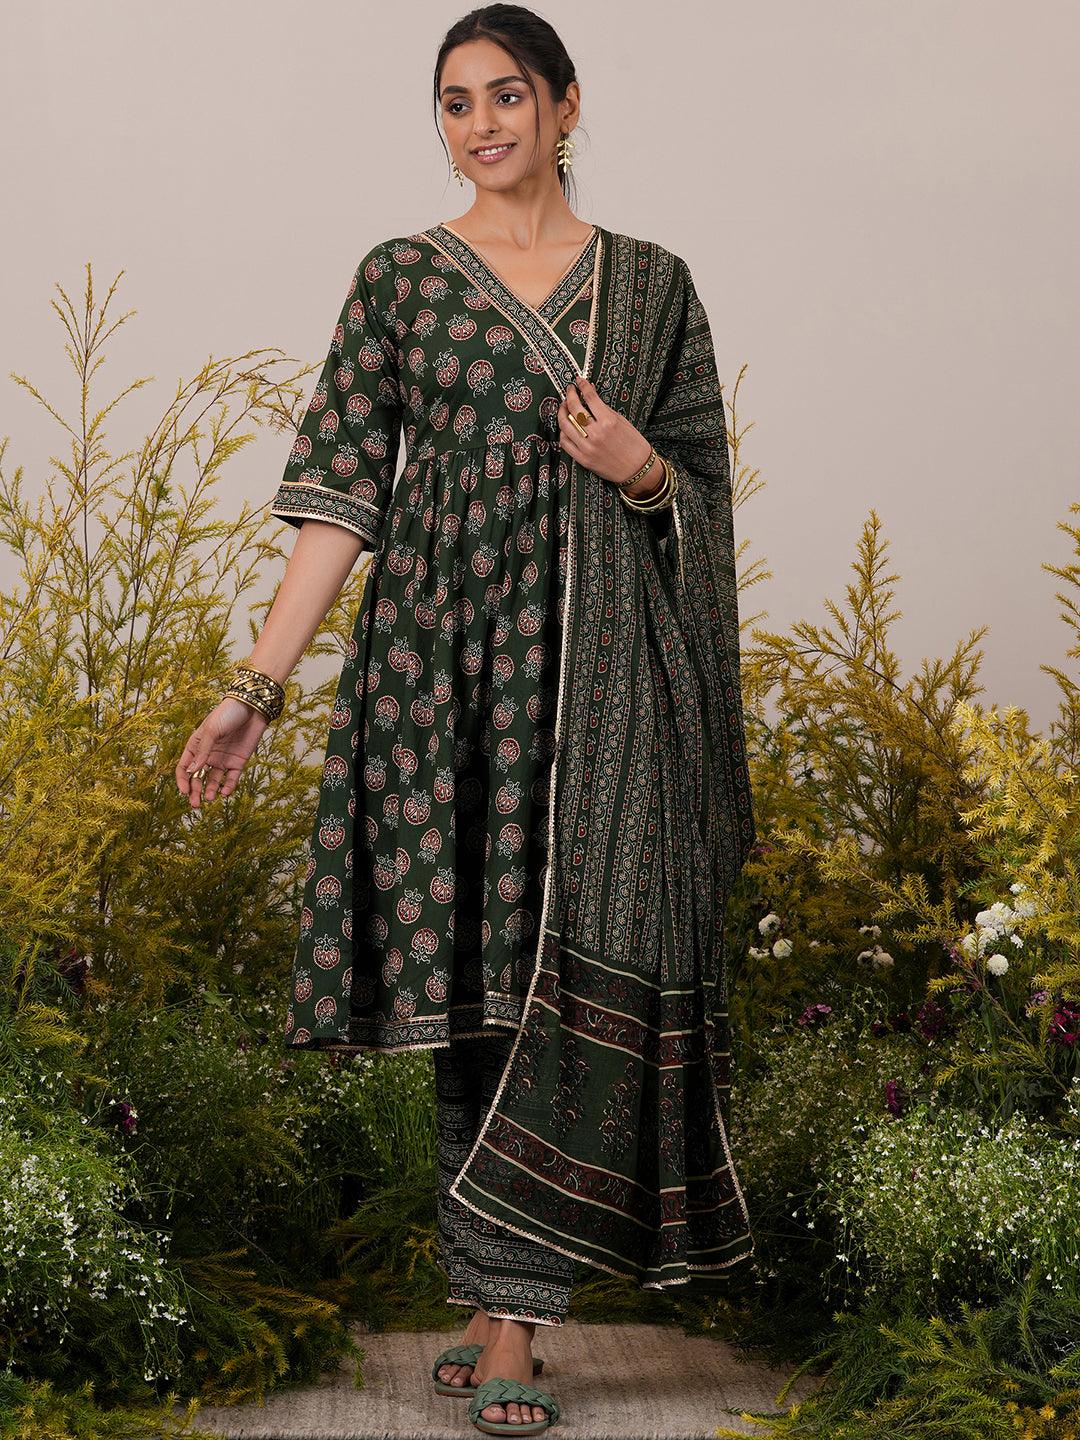 Green Printed Cotton Anarkali Suit With Dupatta - Libas